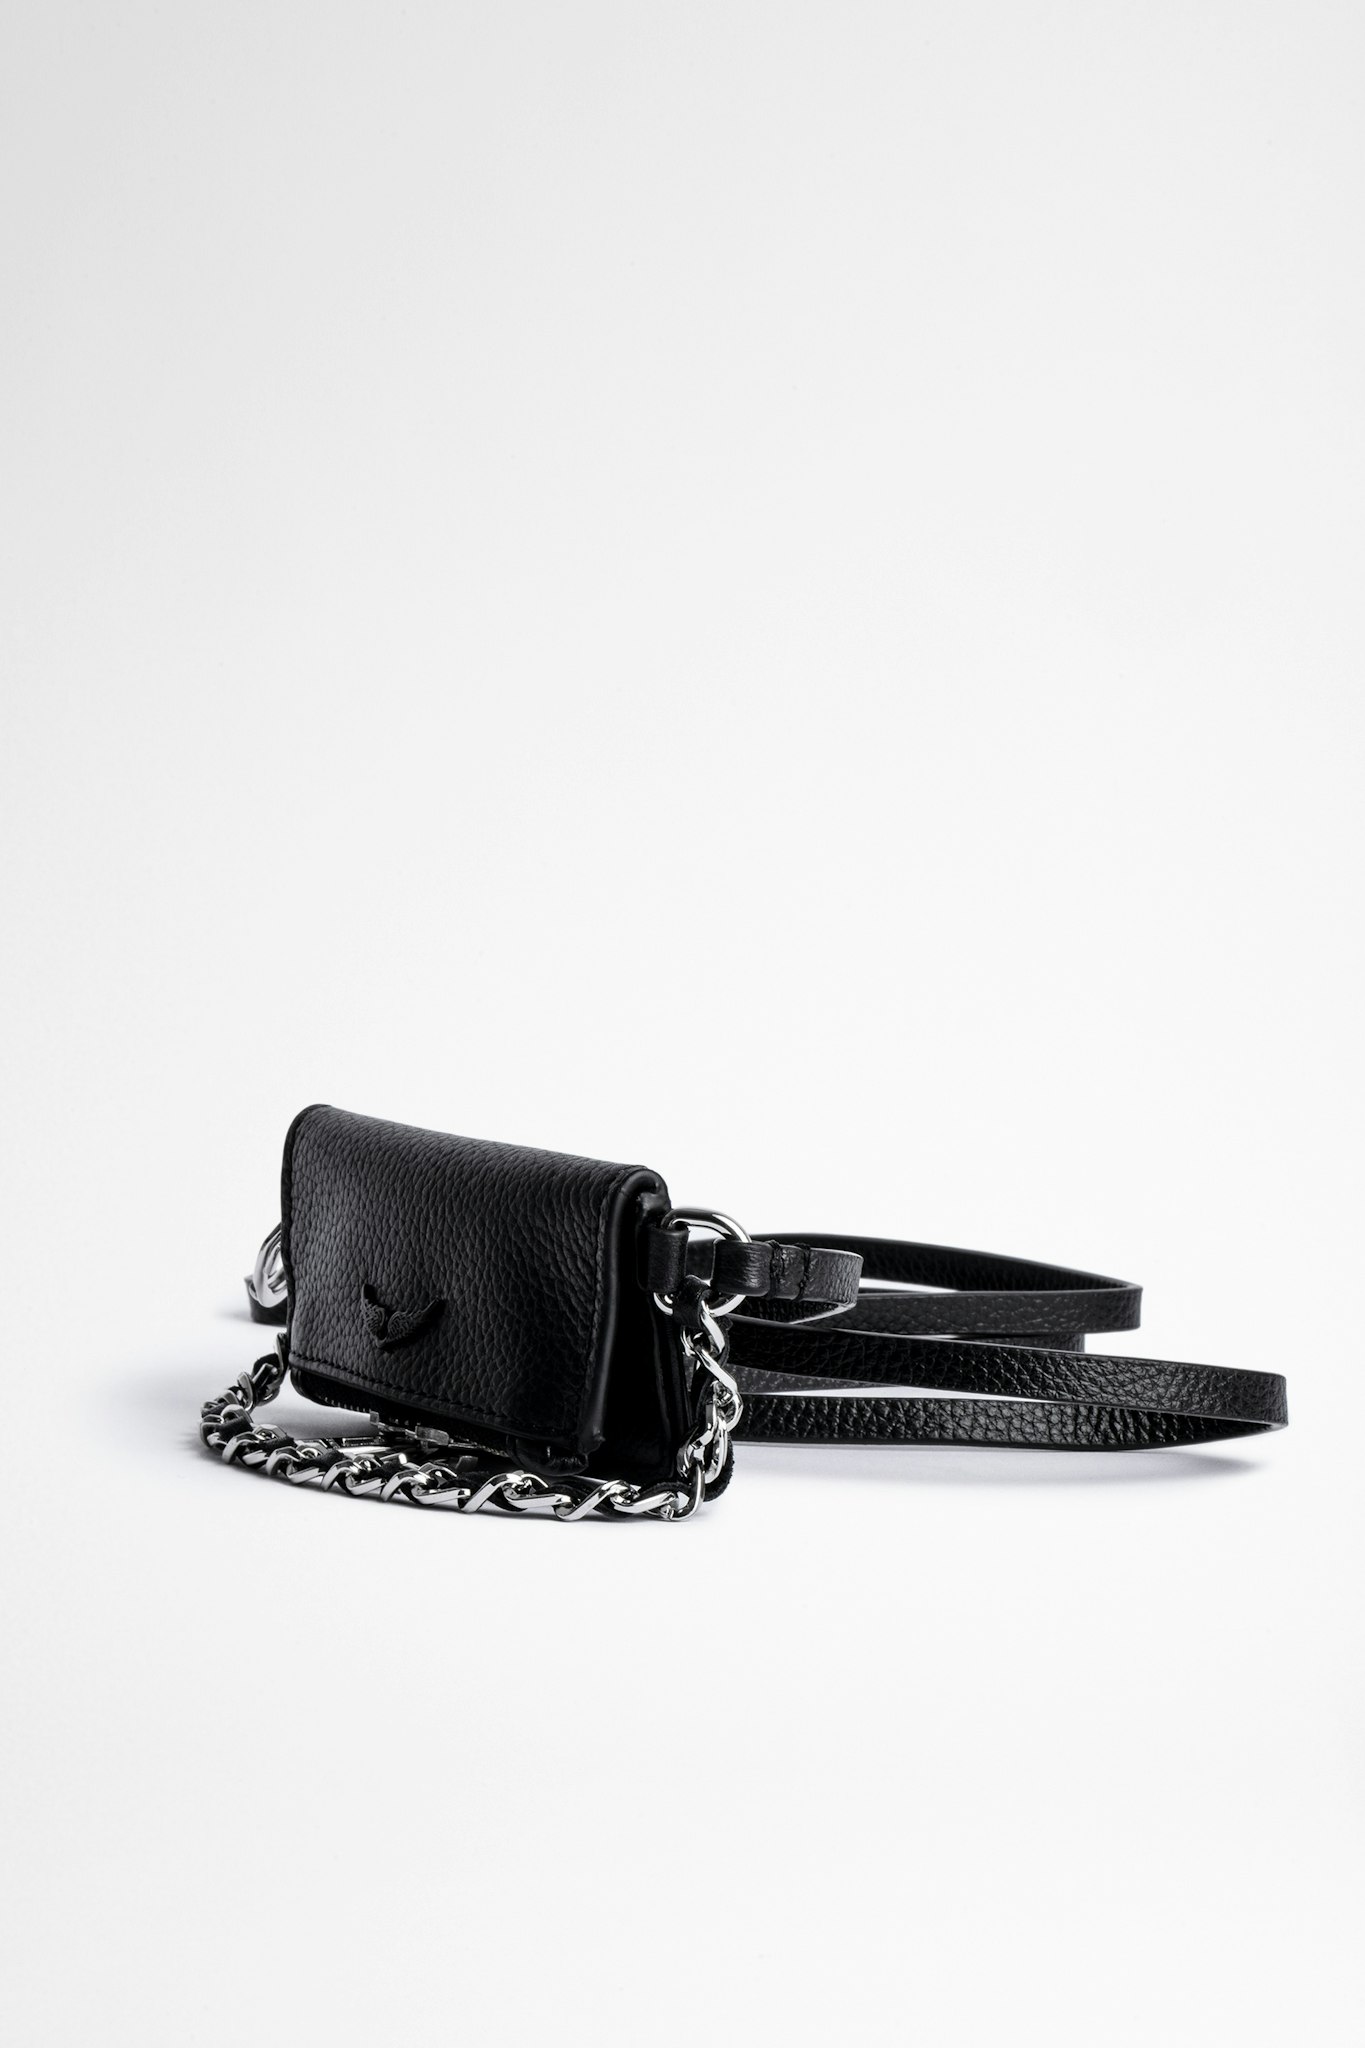 Grained Leather Grigri Rock Bag